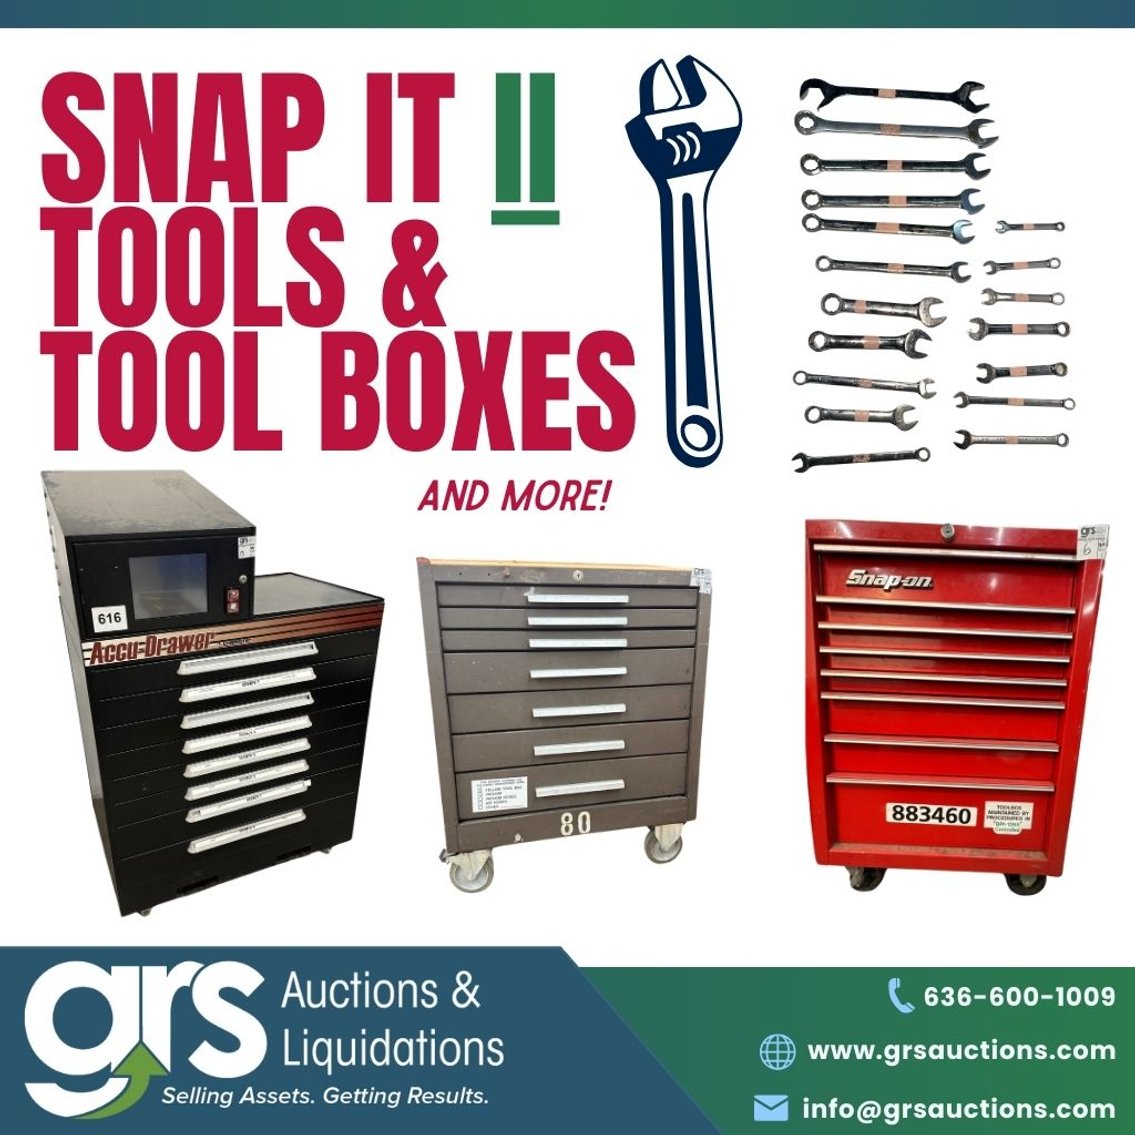 Snap It 2 Tools and Tool Boxes. more from Boeing!